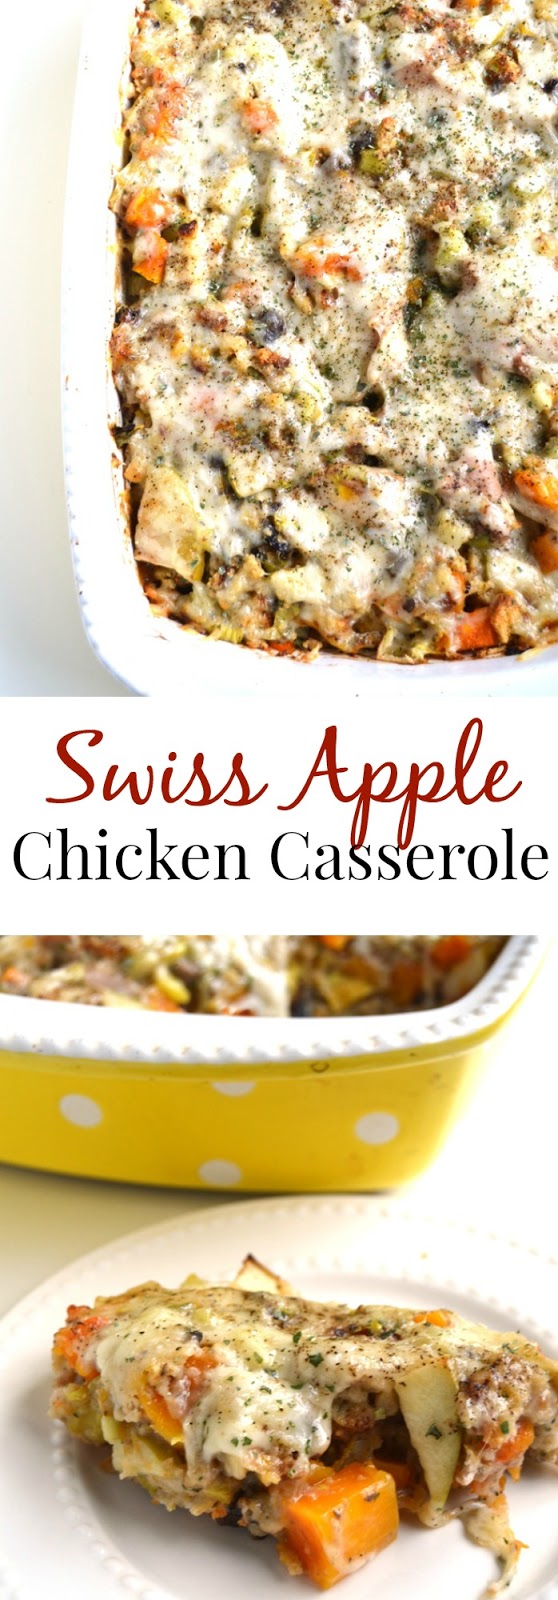 Swiss Apple Chicken Casserole is simple to make and loaded with creamy Swiss cheese, fresh apples, butternut squash and celery for a hearty and delicious family meal! www.nutritionistreviews.com